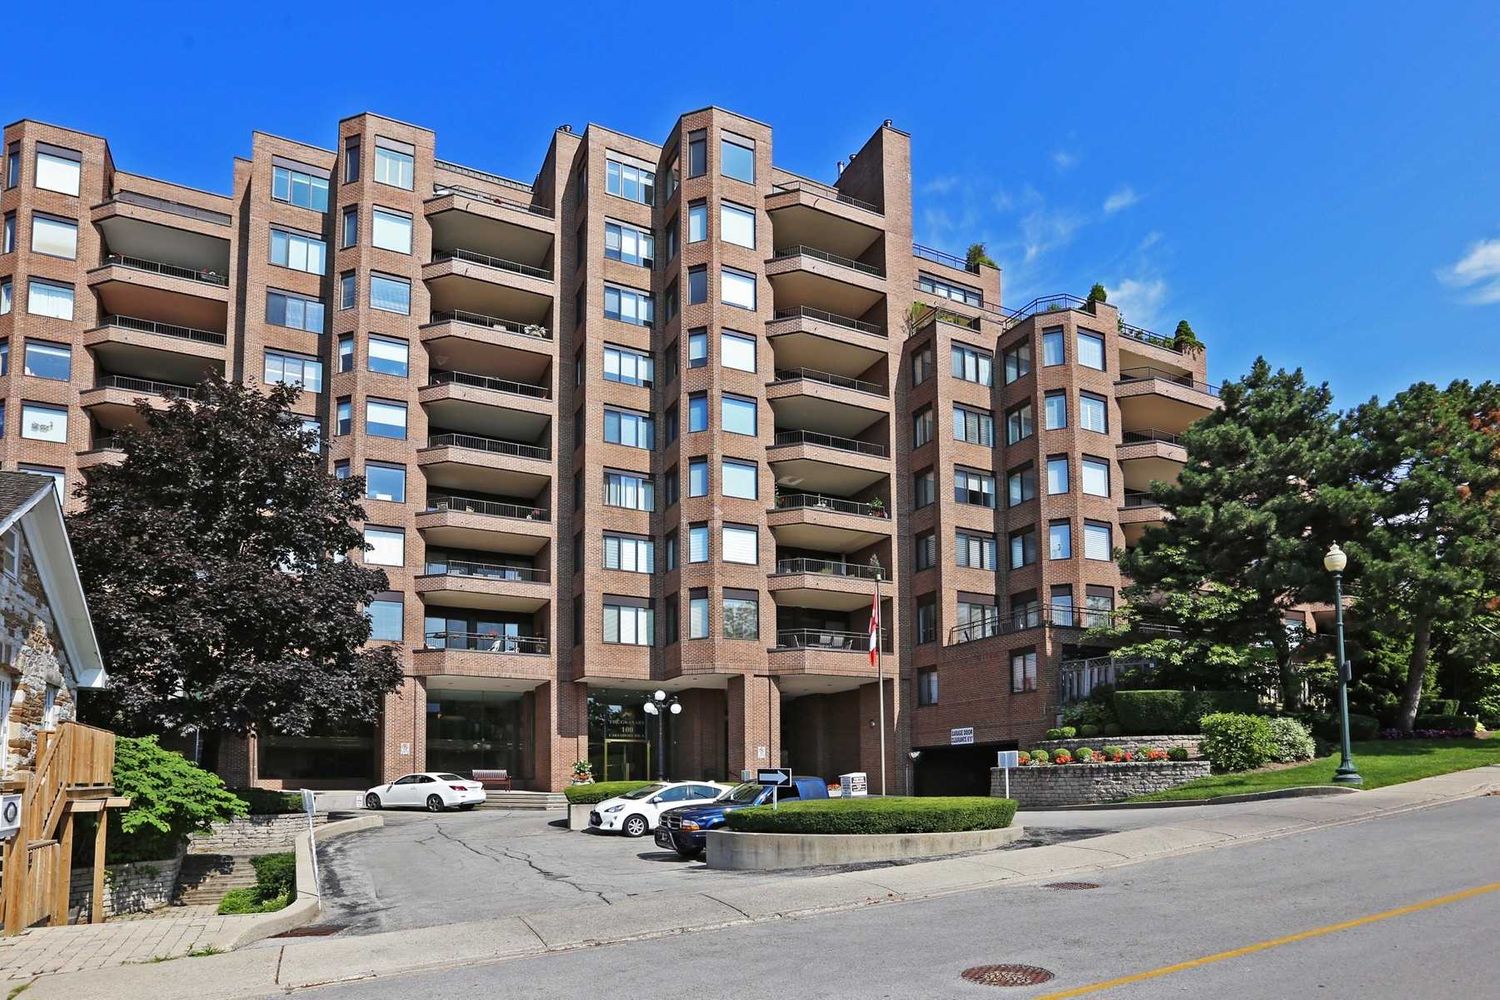 100 Lakeshore Road E. The Granary Condos is located in  Oakville, Toronto - image #1 of 2